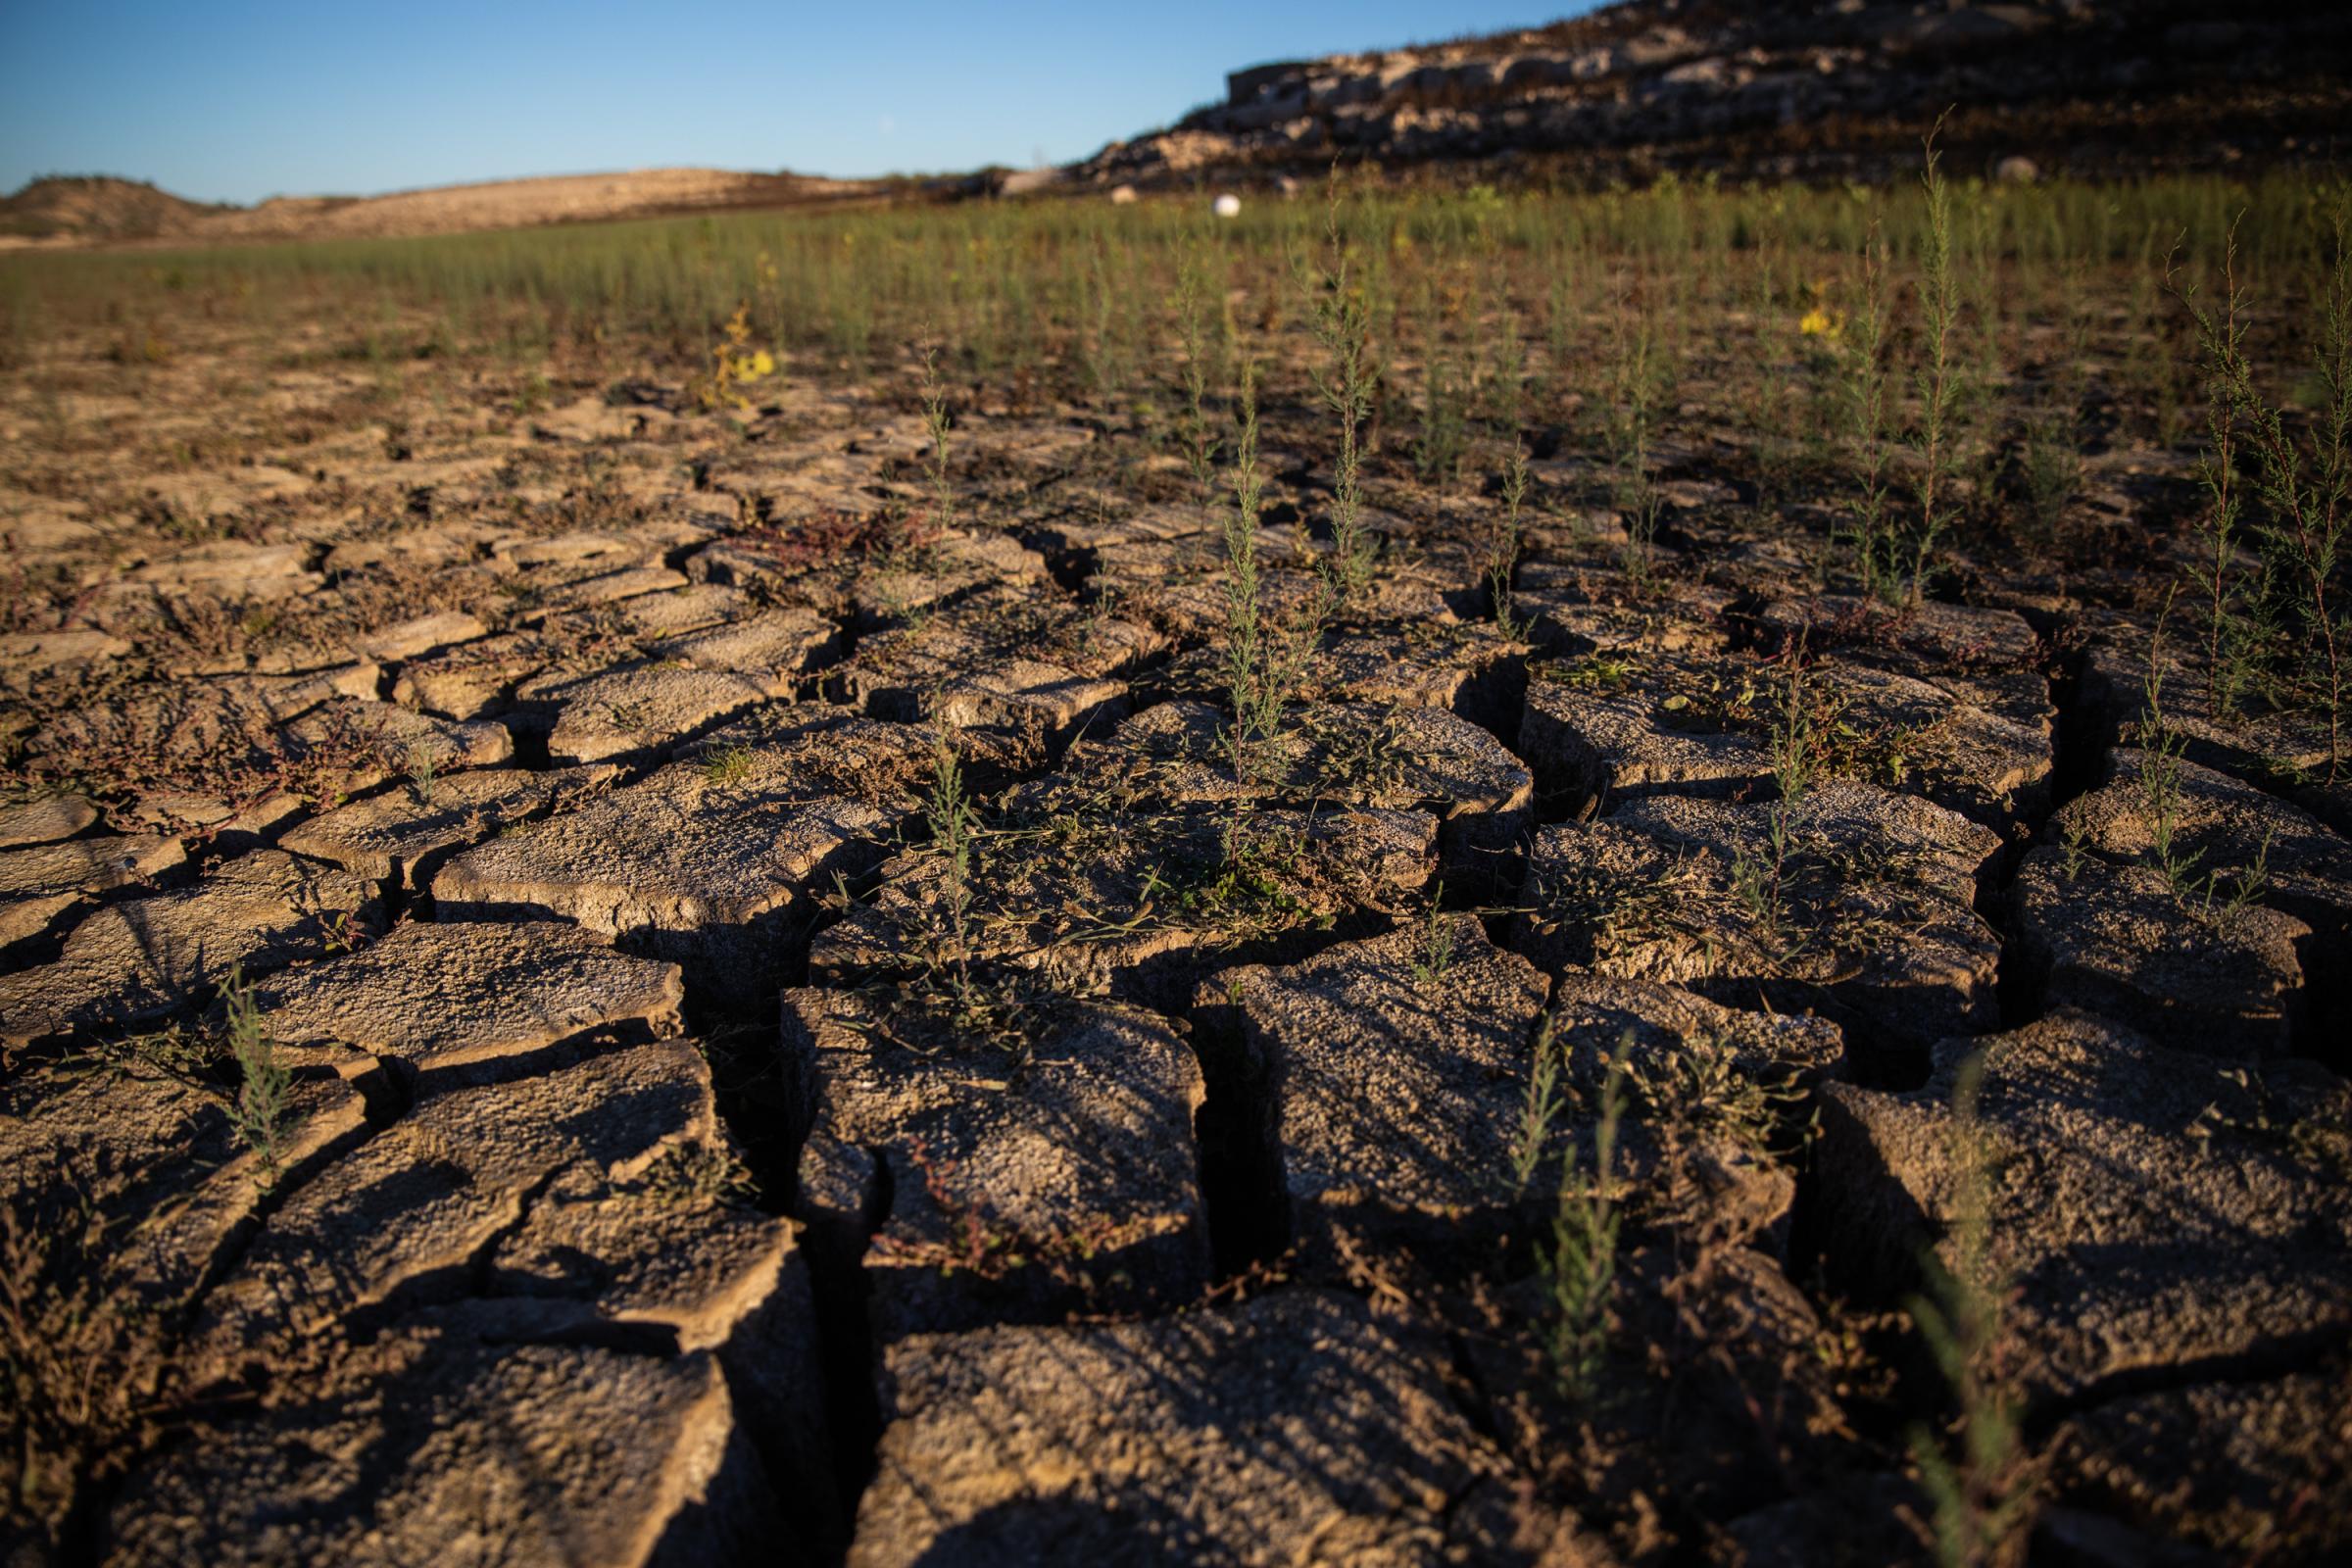 Spain's Drought Threatens Electricity Production At Mequinenza Plant - CASPE, SPAIN - NOVEMBER 05: Erosion of the land as the...